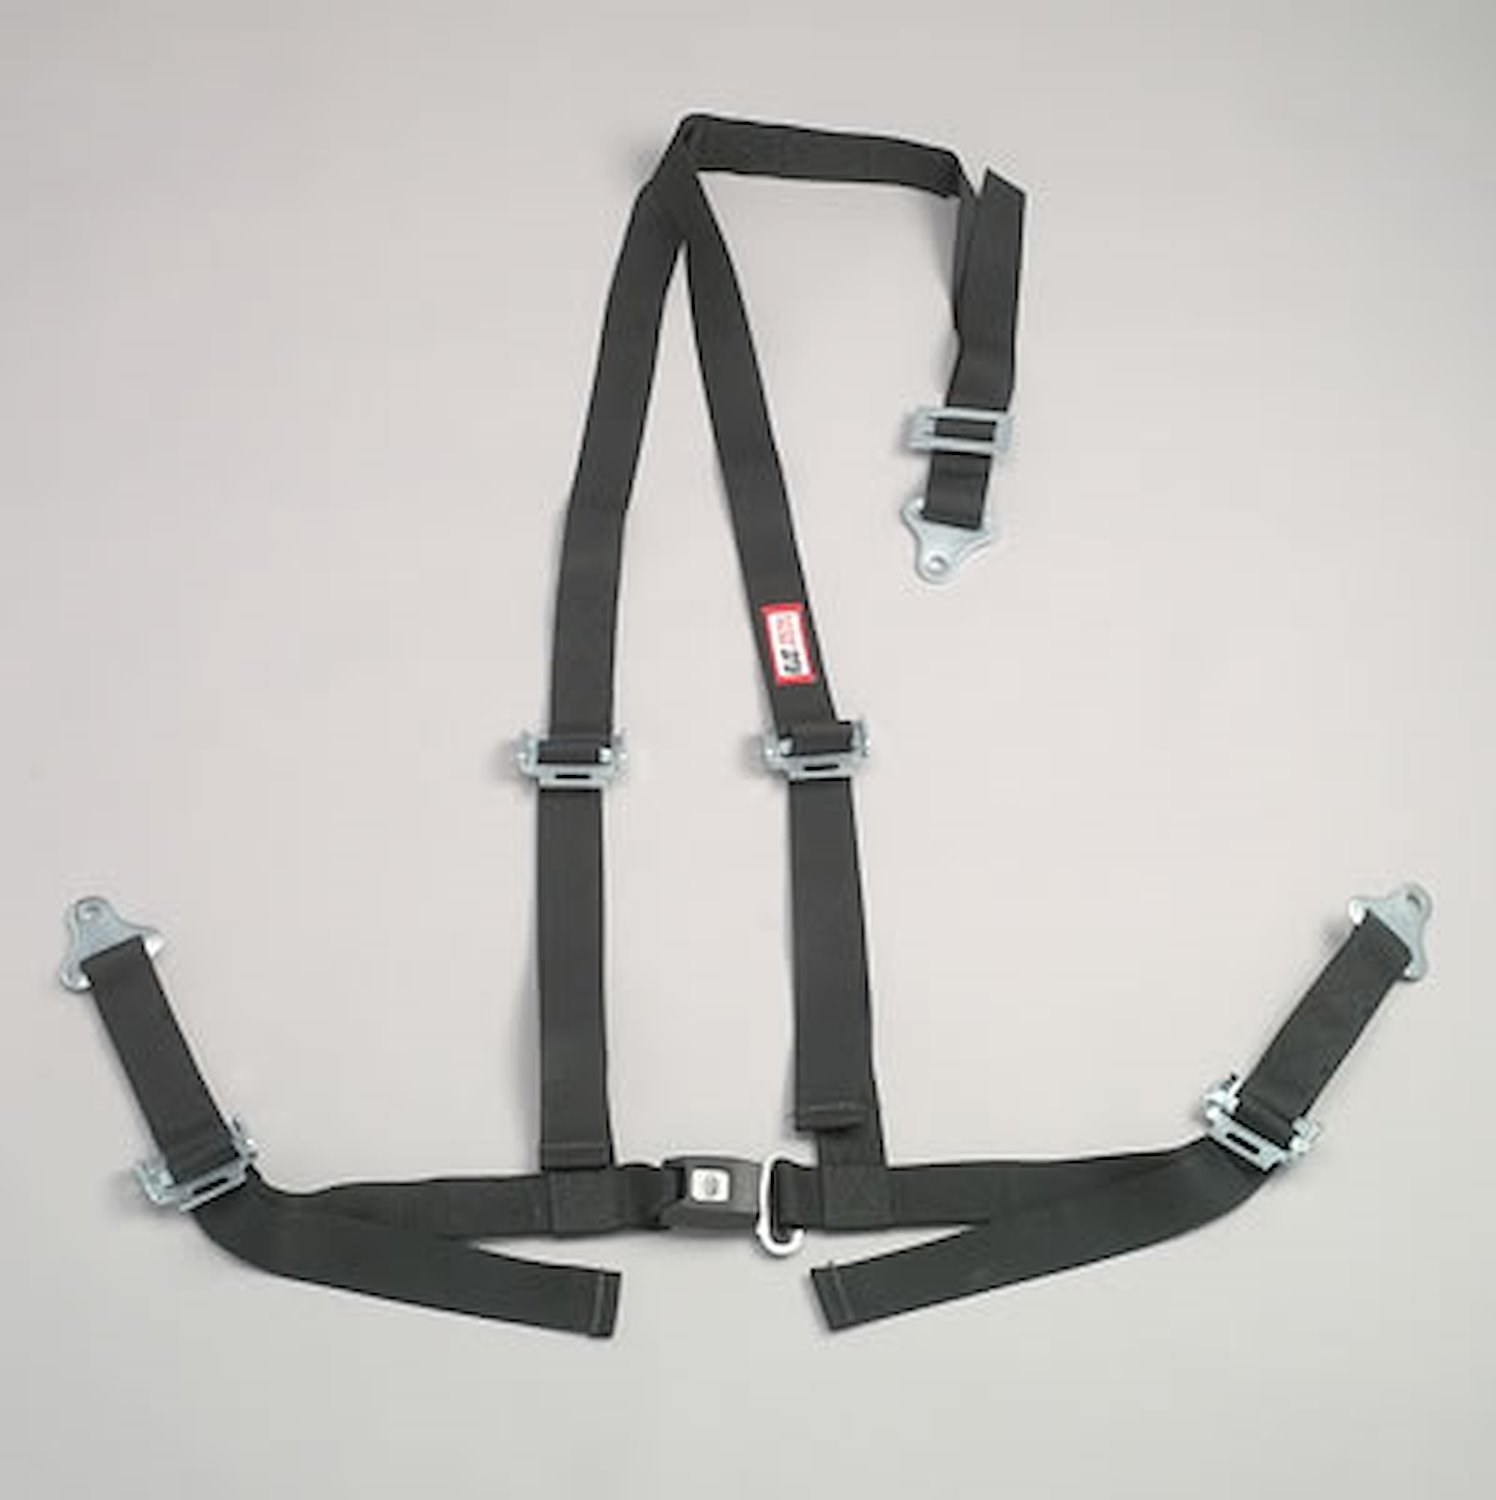 NON-SFI B&T HARNESS 2 PULL UP Lap Belt 2 S. H. V ROLL BAR Mount ALL WRAP ENDS w/STERNUM STRAP GRAY